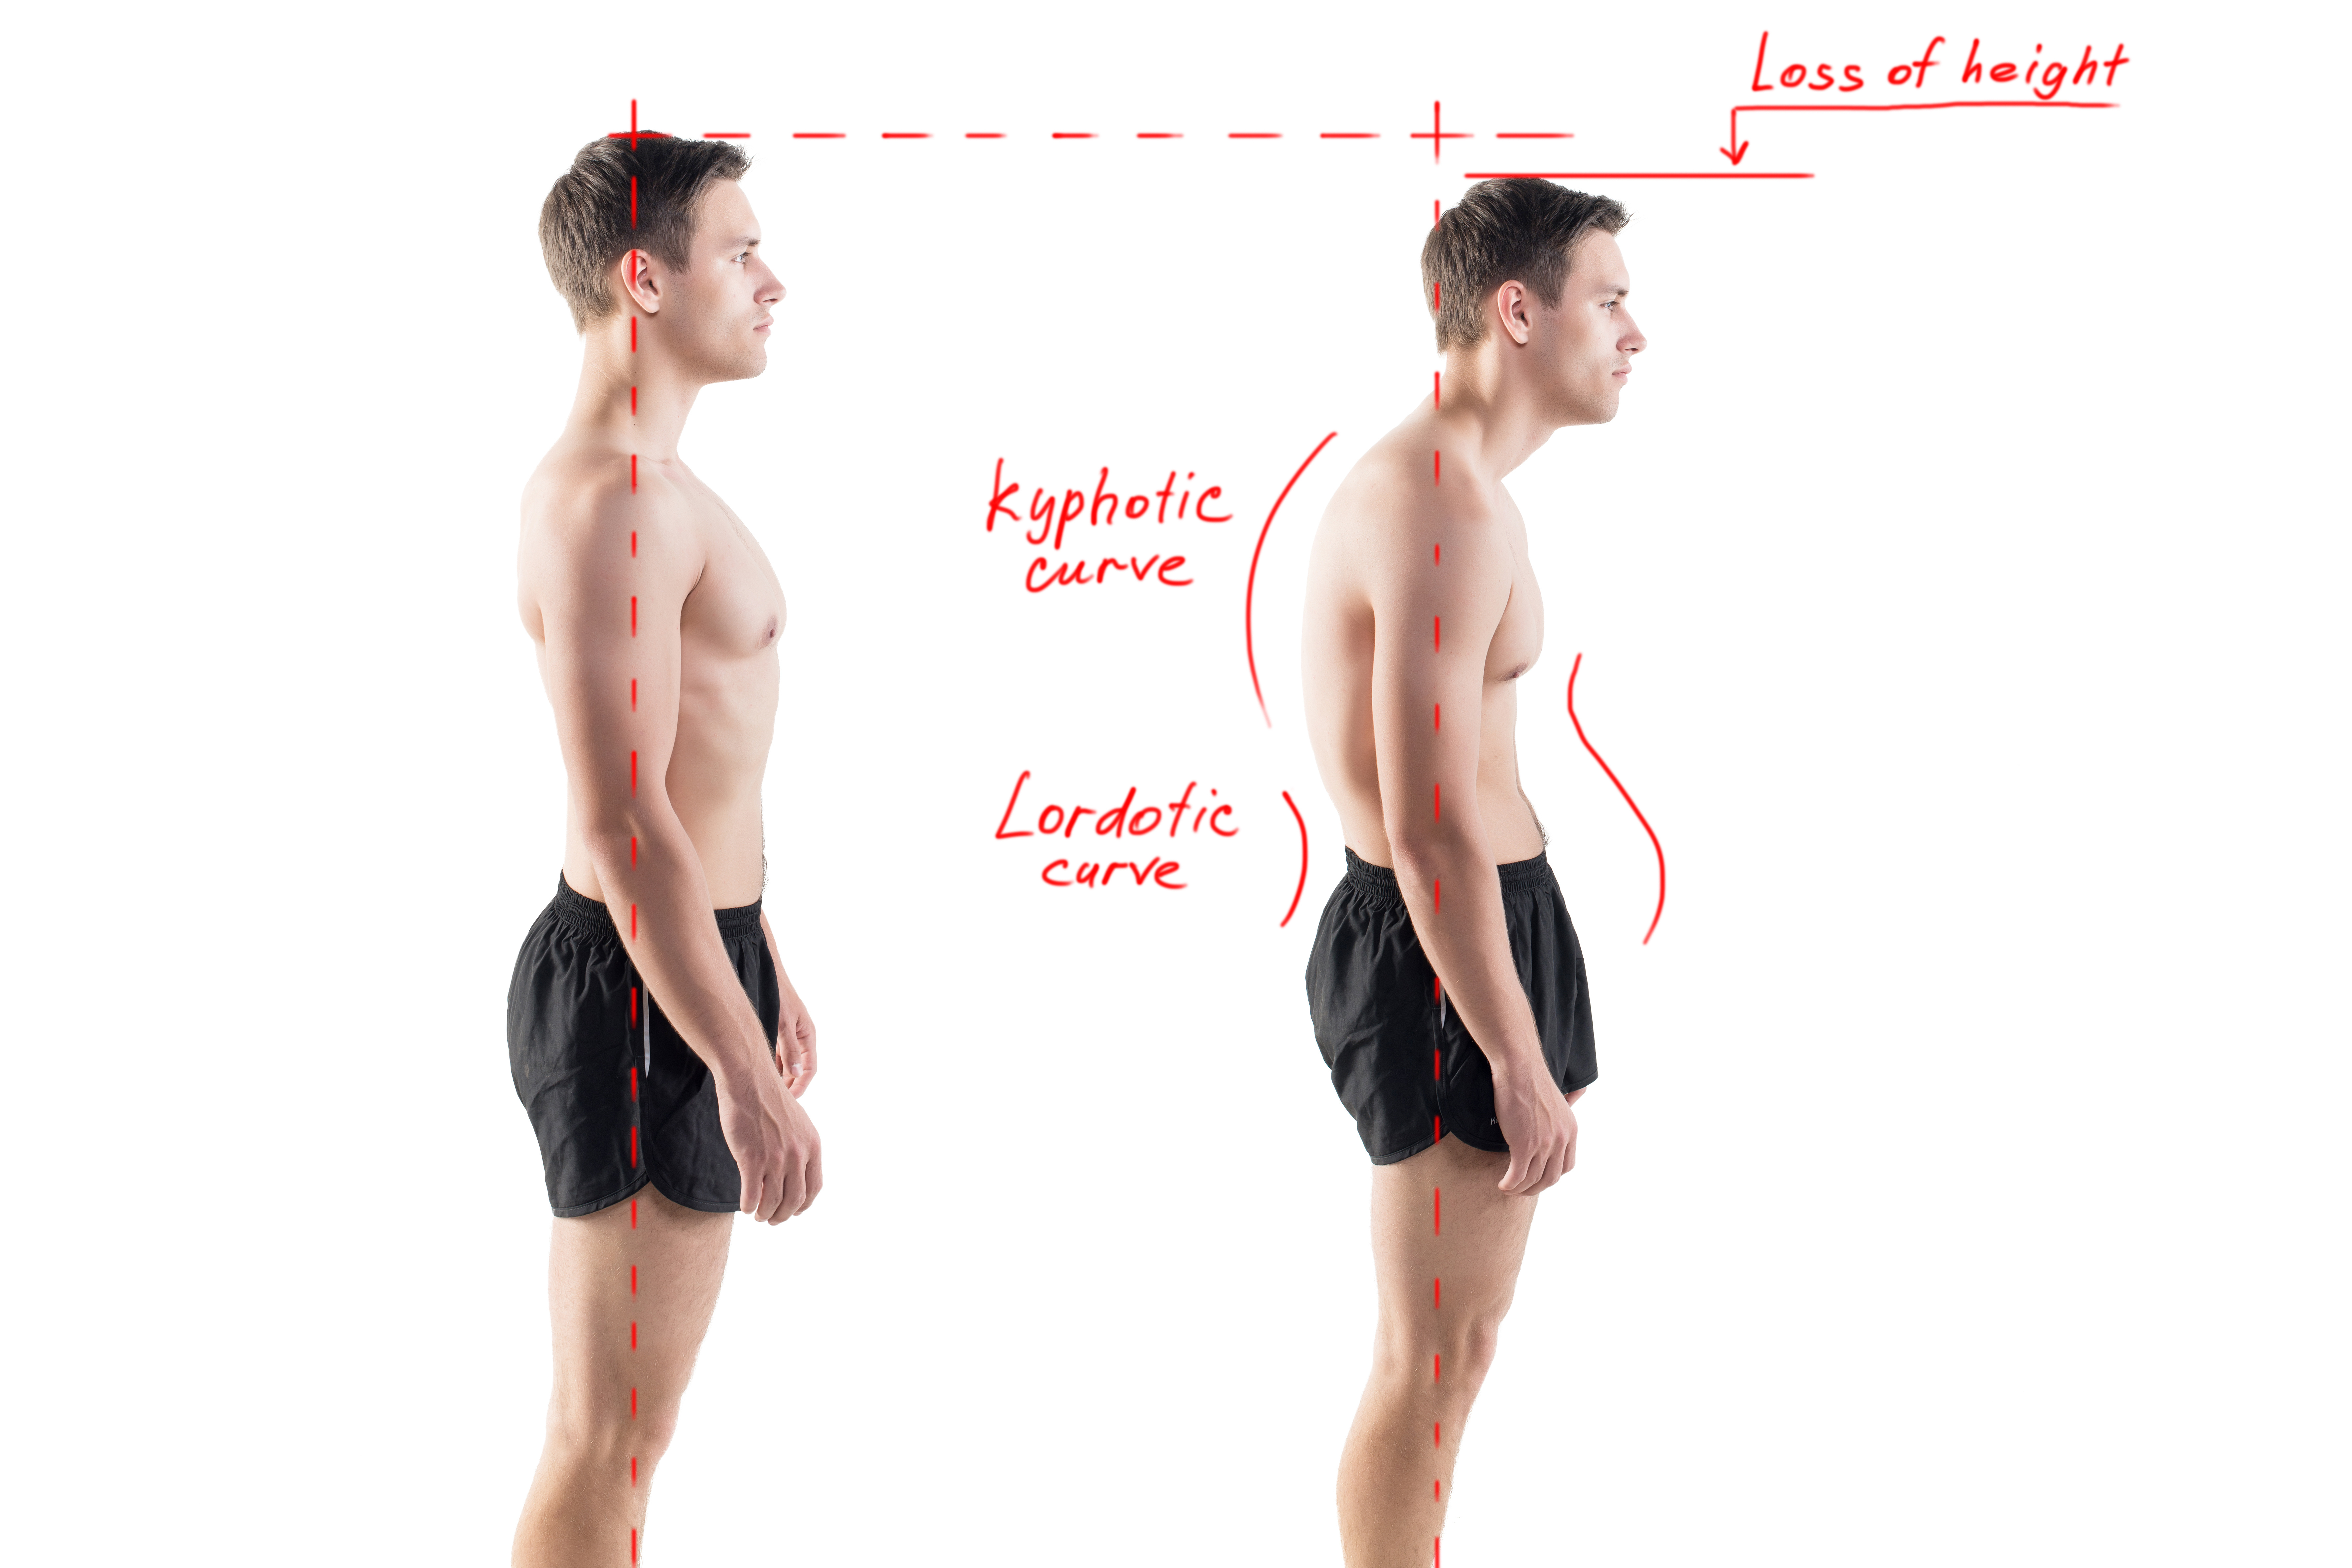 Man with impaired posture position defect scoliosis and ideal bearing